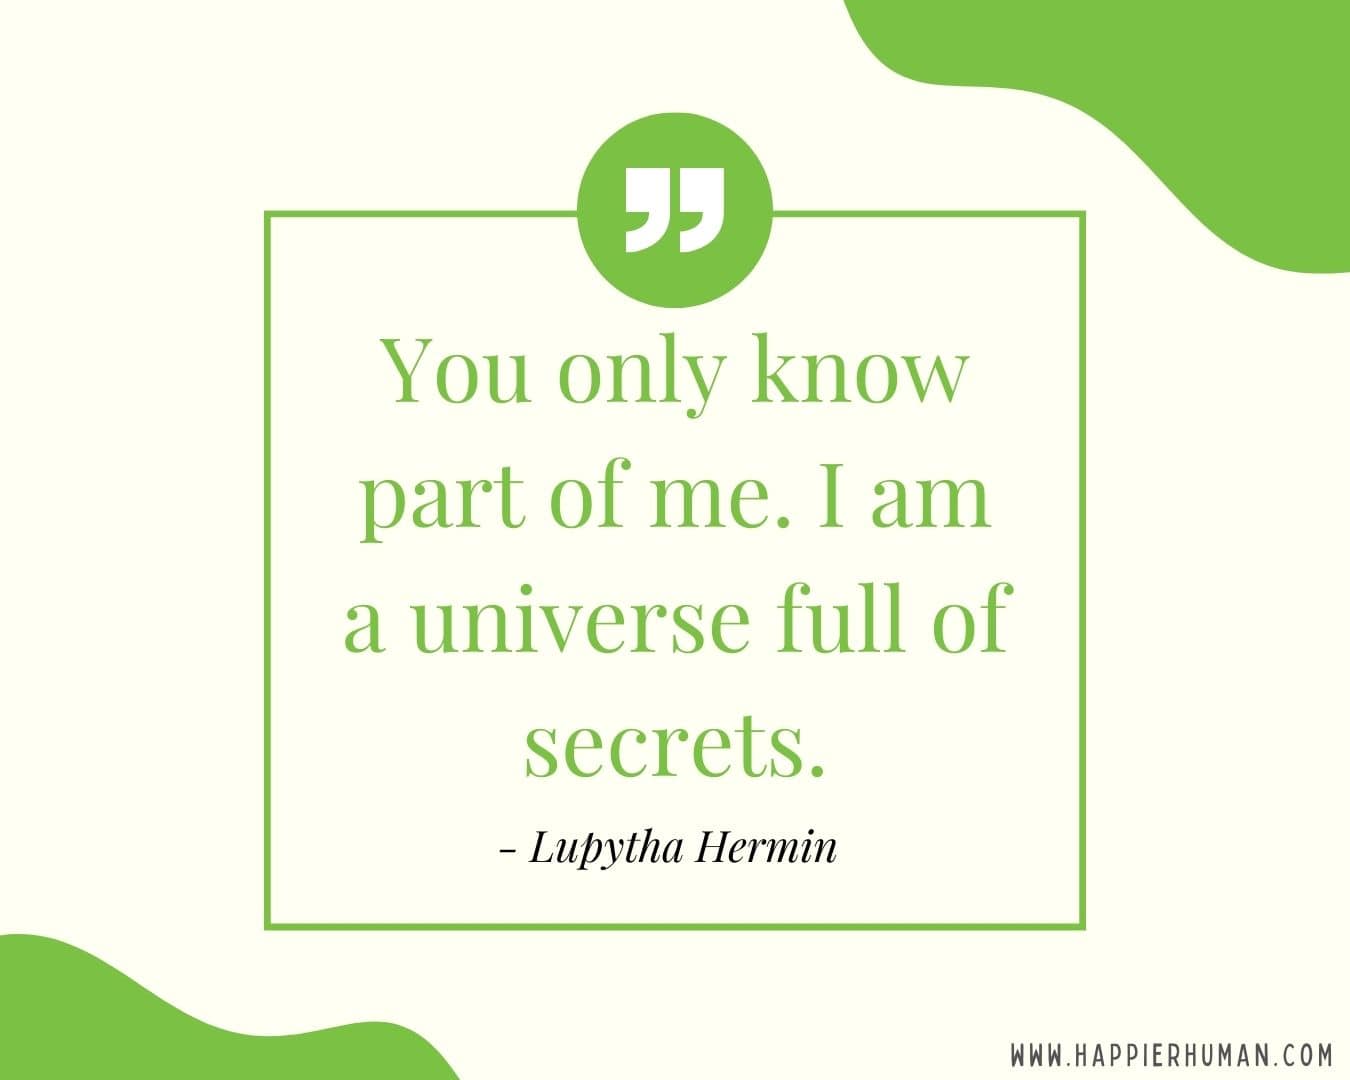 Introvert Quotes - “You only know part of me. I am a universe full of secrets.” – Lupytha Hermin